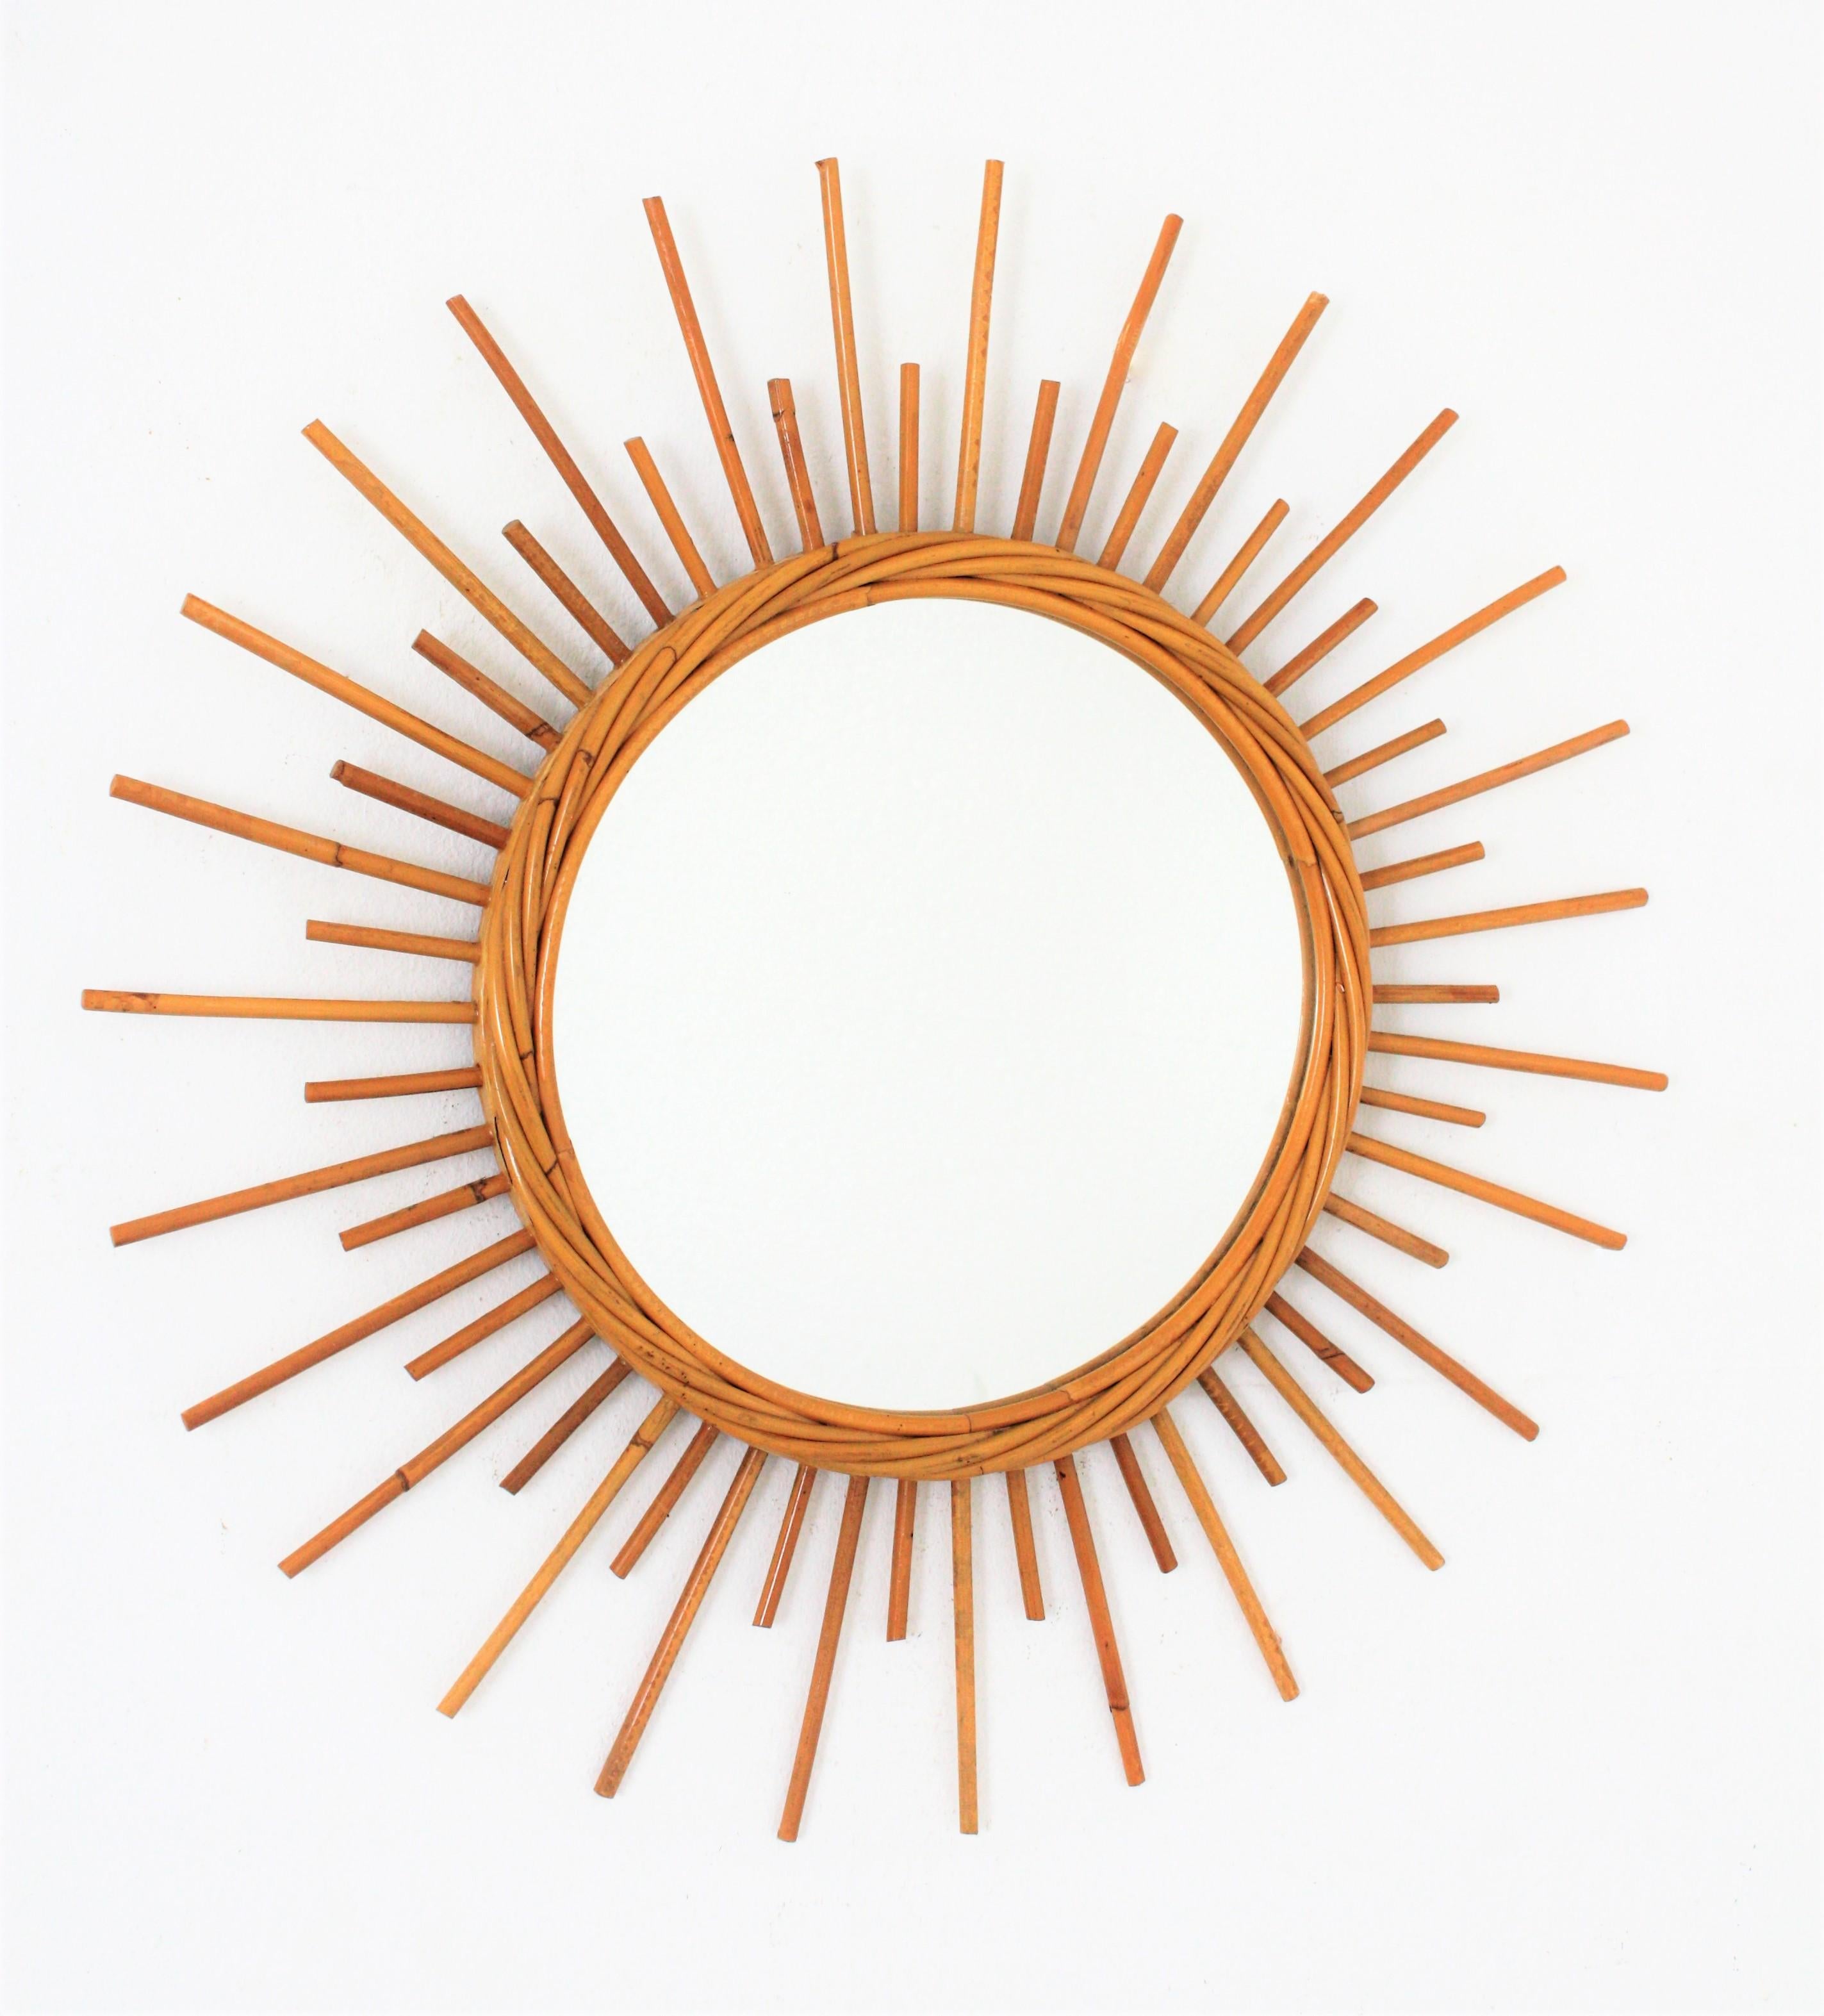 Lovely rattan sunburst or starburst wall mirror from the French Mediterranean Coast. France, 1960s.
Beautiful to place in a wall decoration with other bamboo, rattan or wicker mirrors, but also lovely to place it alone.
This piece has all the taste